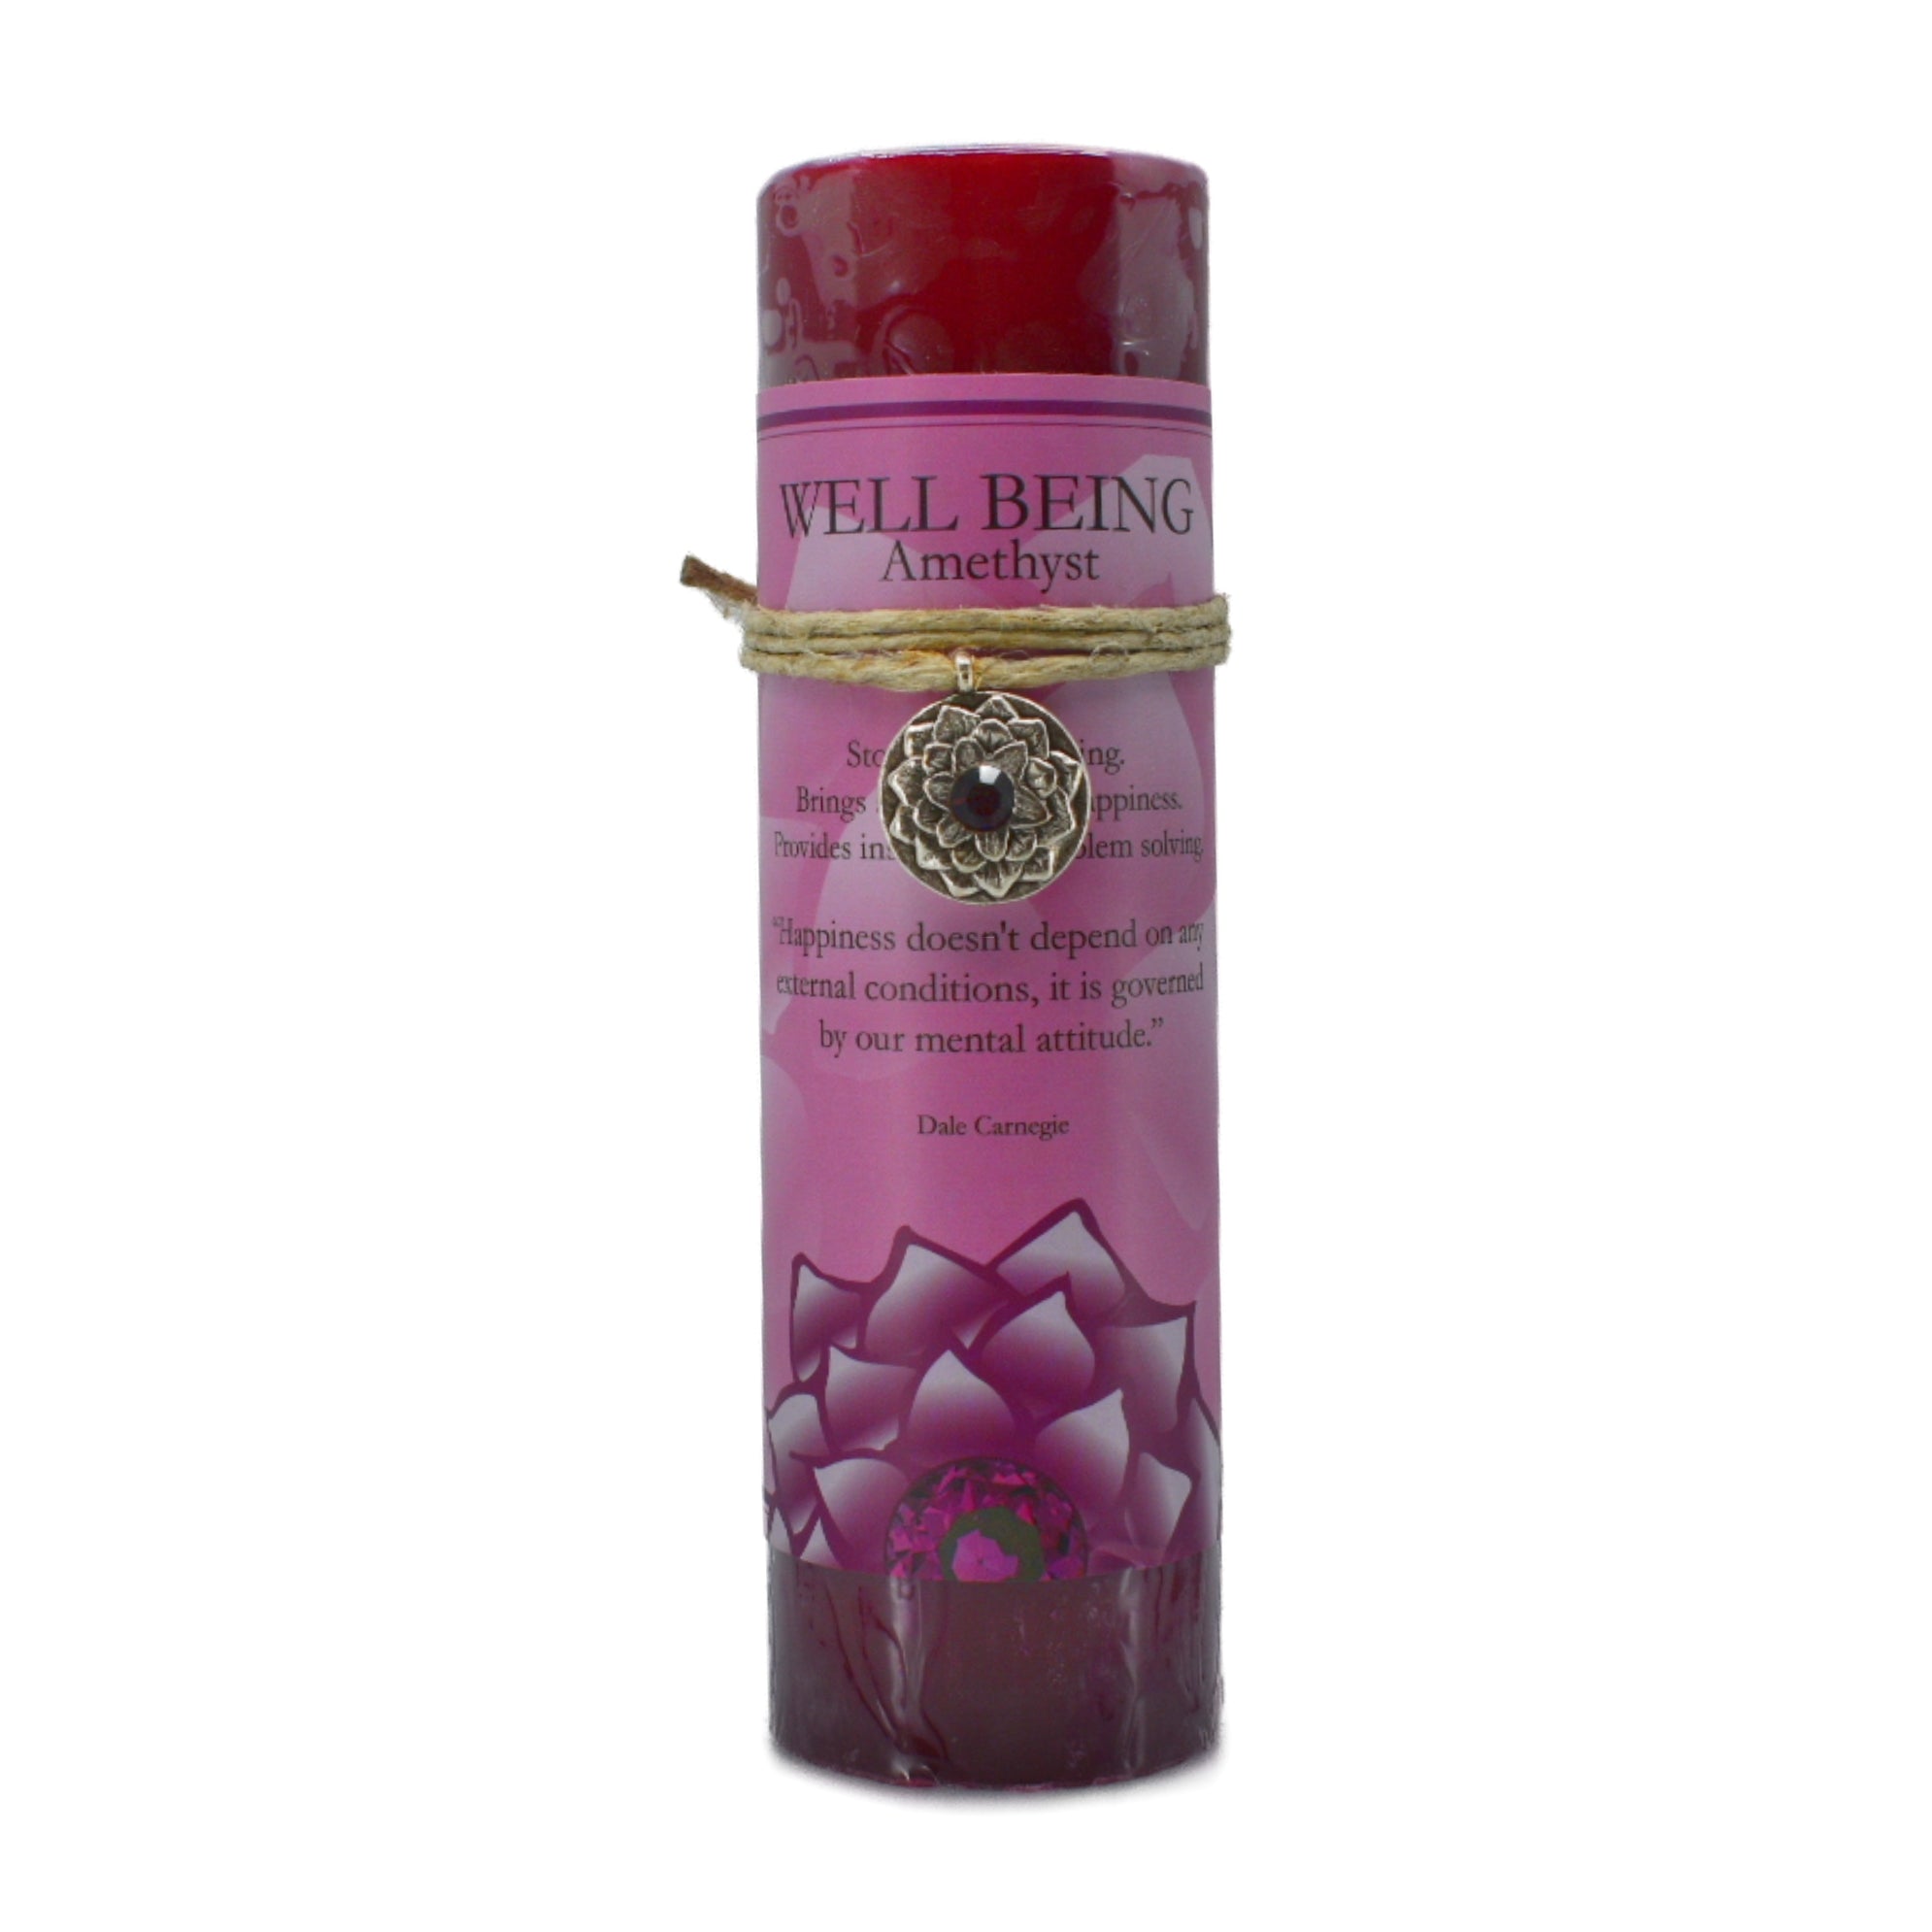 Well Being Lotus Pendant Candle.  It is a scented red candle.  The attached lotus pewter pendant has an amethyst in the center.  The pendant can be worn as a necklace or used as an amulet.  Amethyst is the stone of well being.  Light this candle to enhance serenity, happiness and spiritual wisdom.  It provides insight for problem solving, brings hope to your life, contentment to your mind, and purifies negative vibes. 